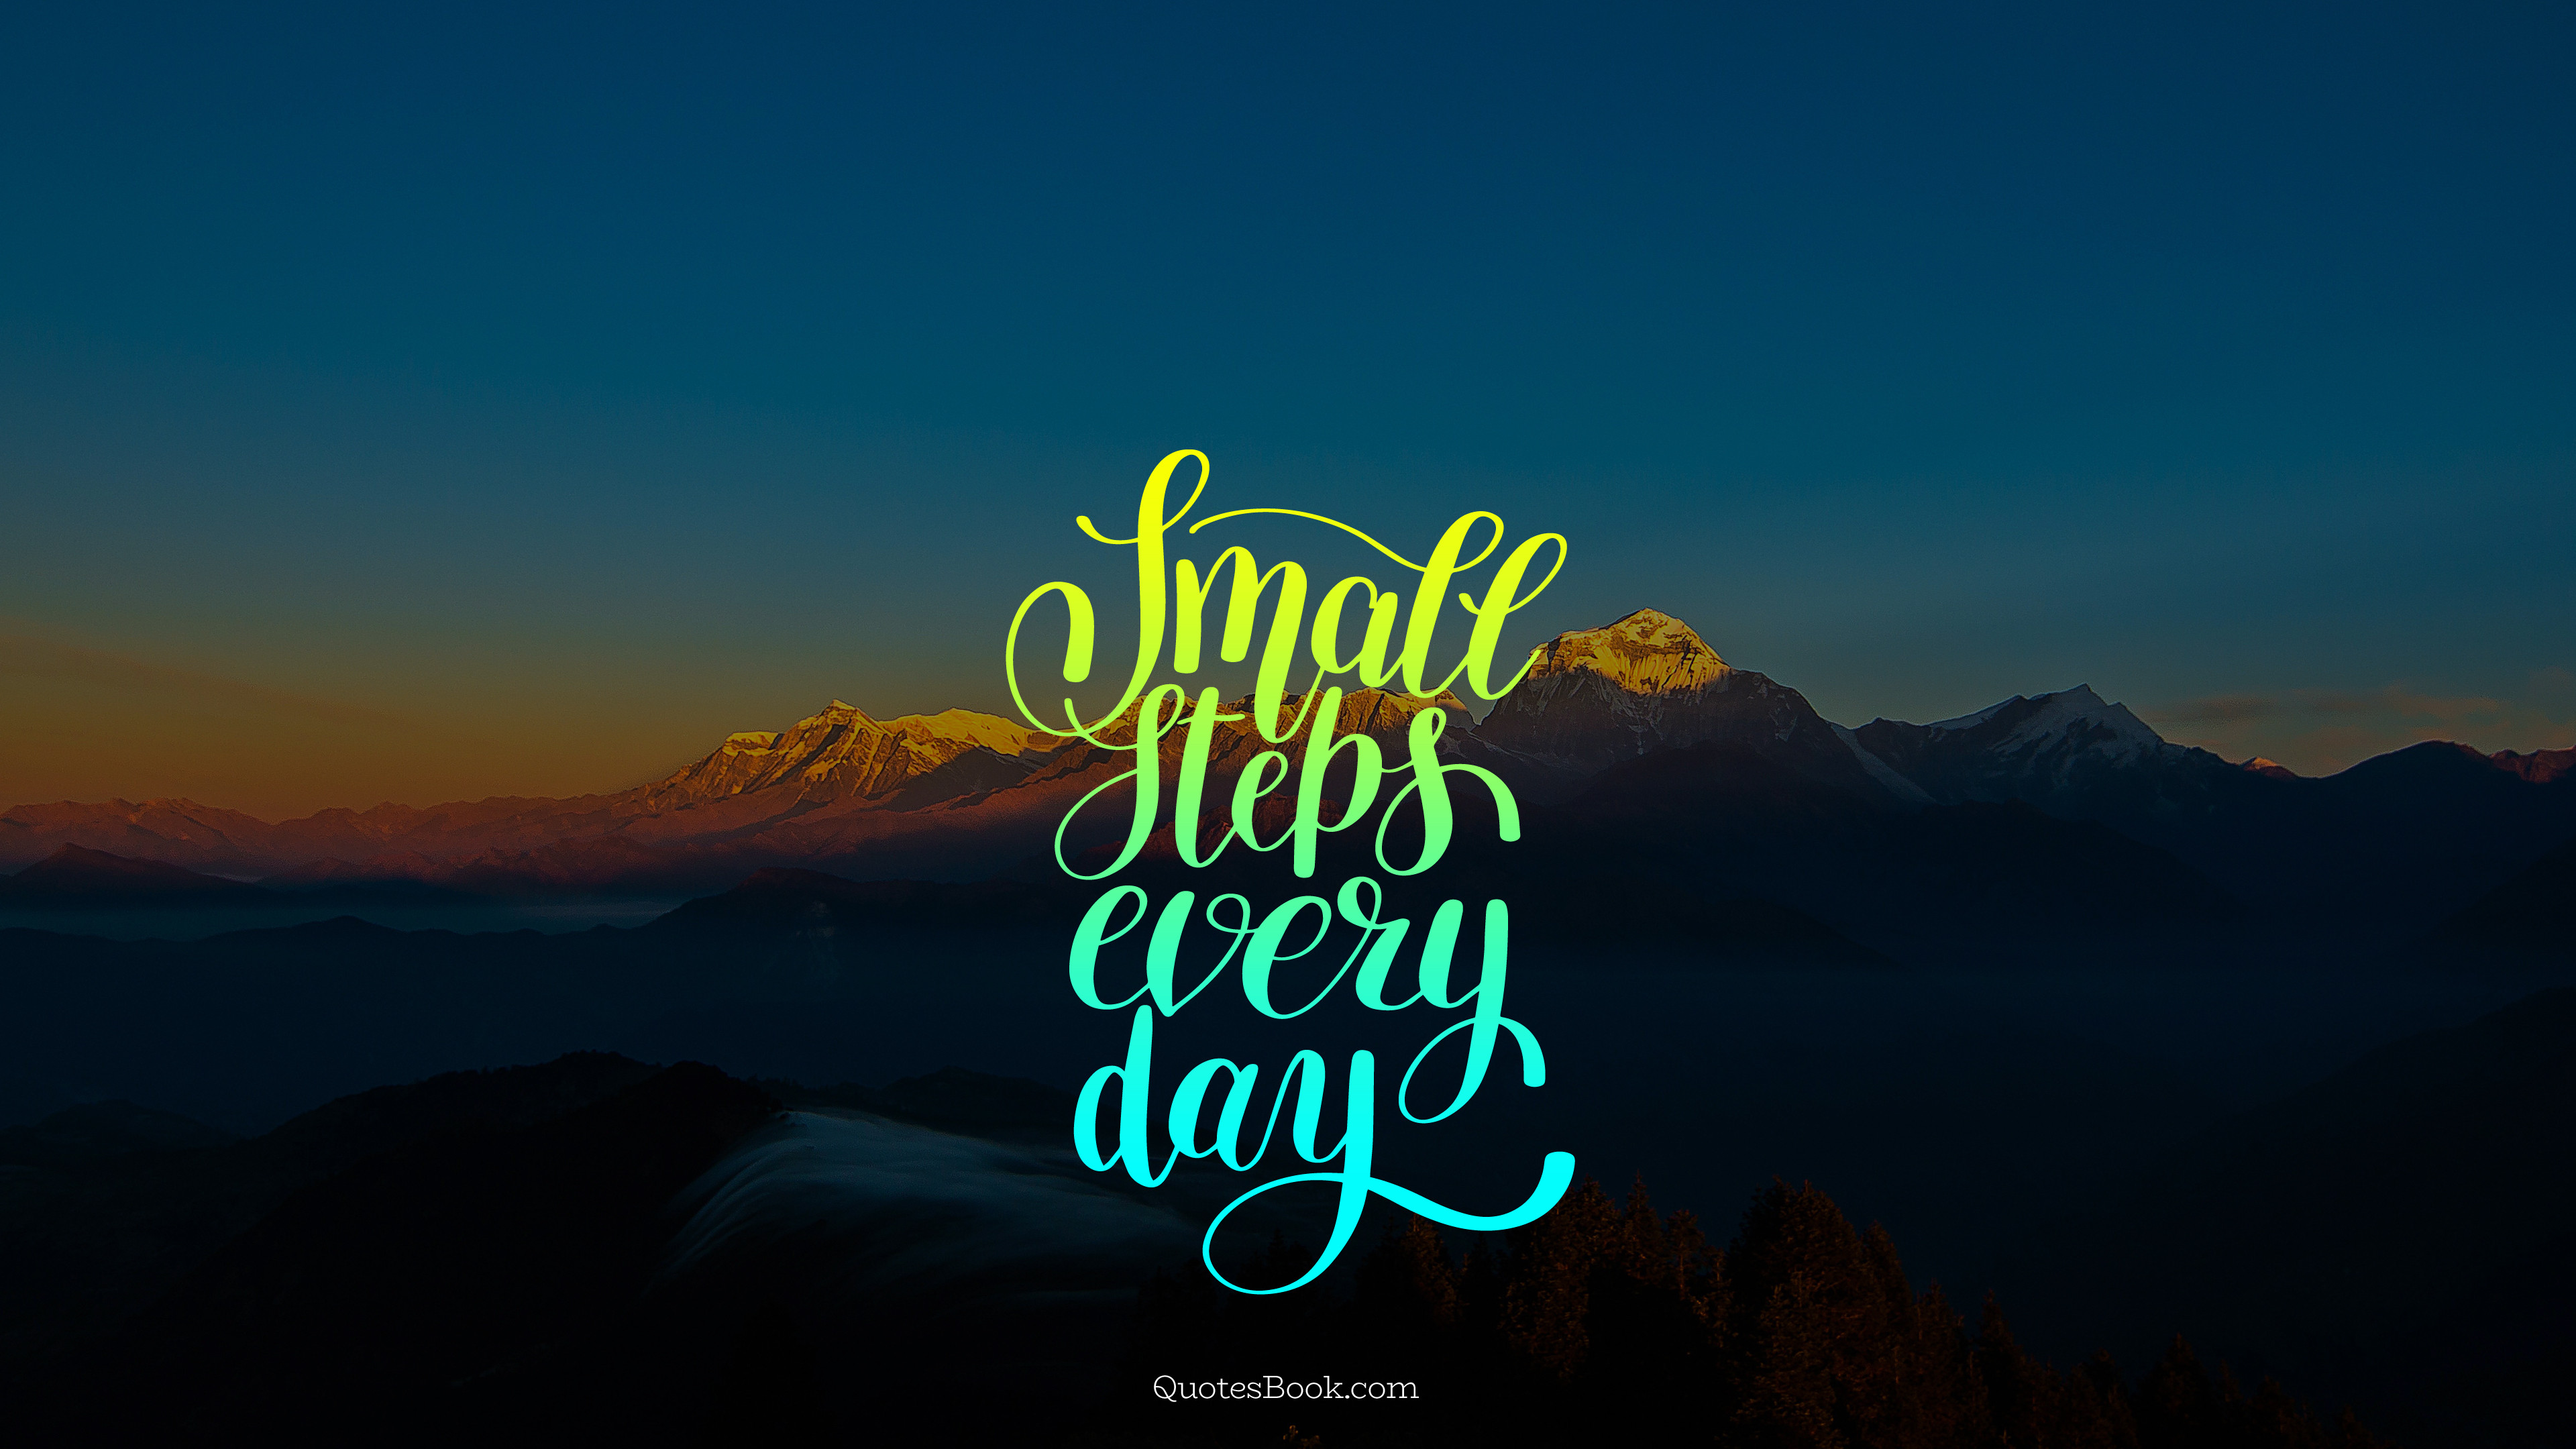 Small steps every day - QuotesBook